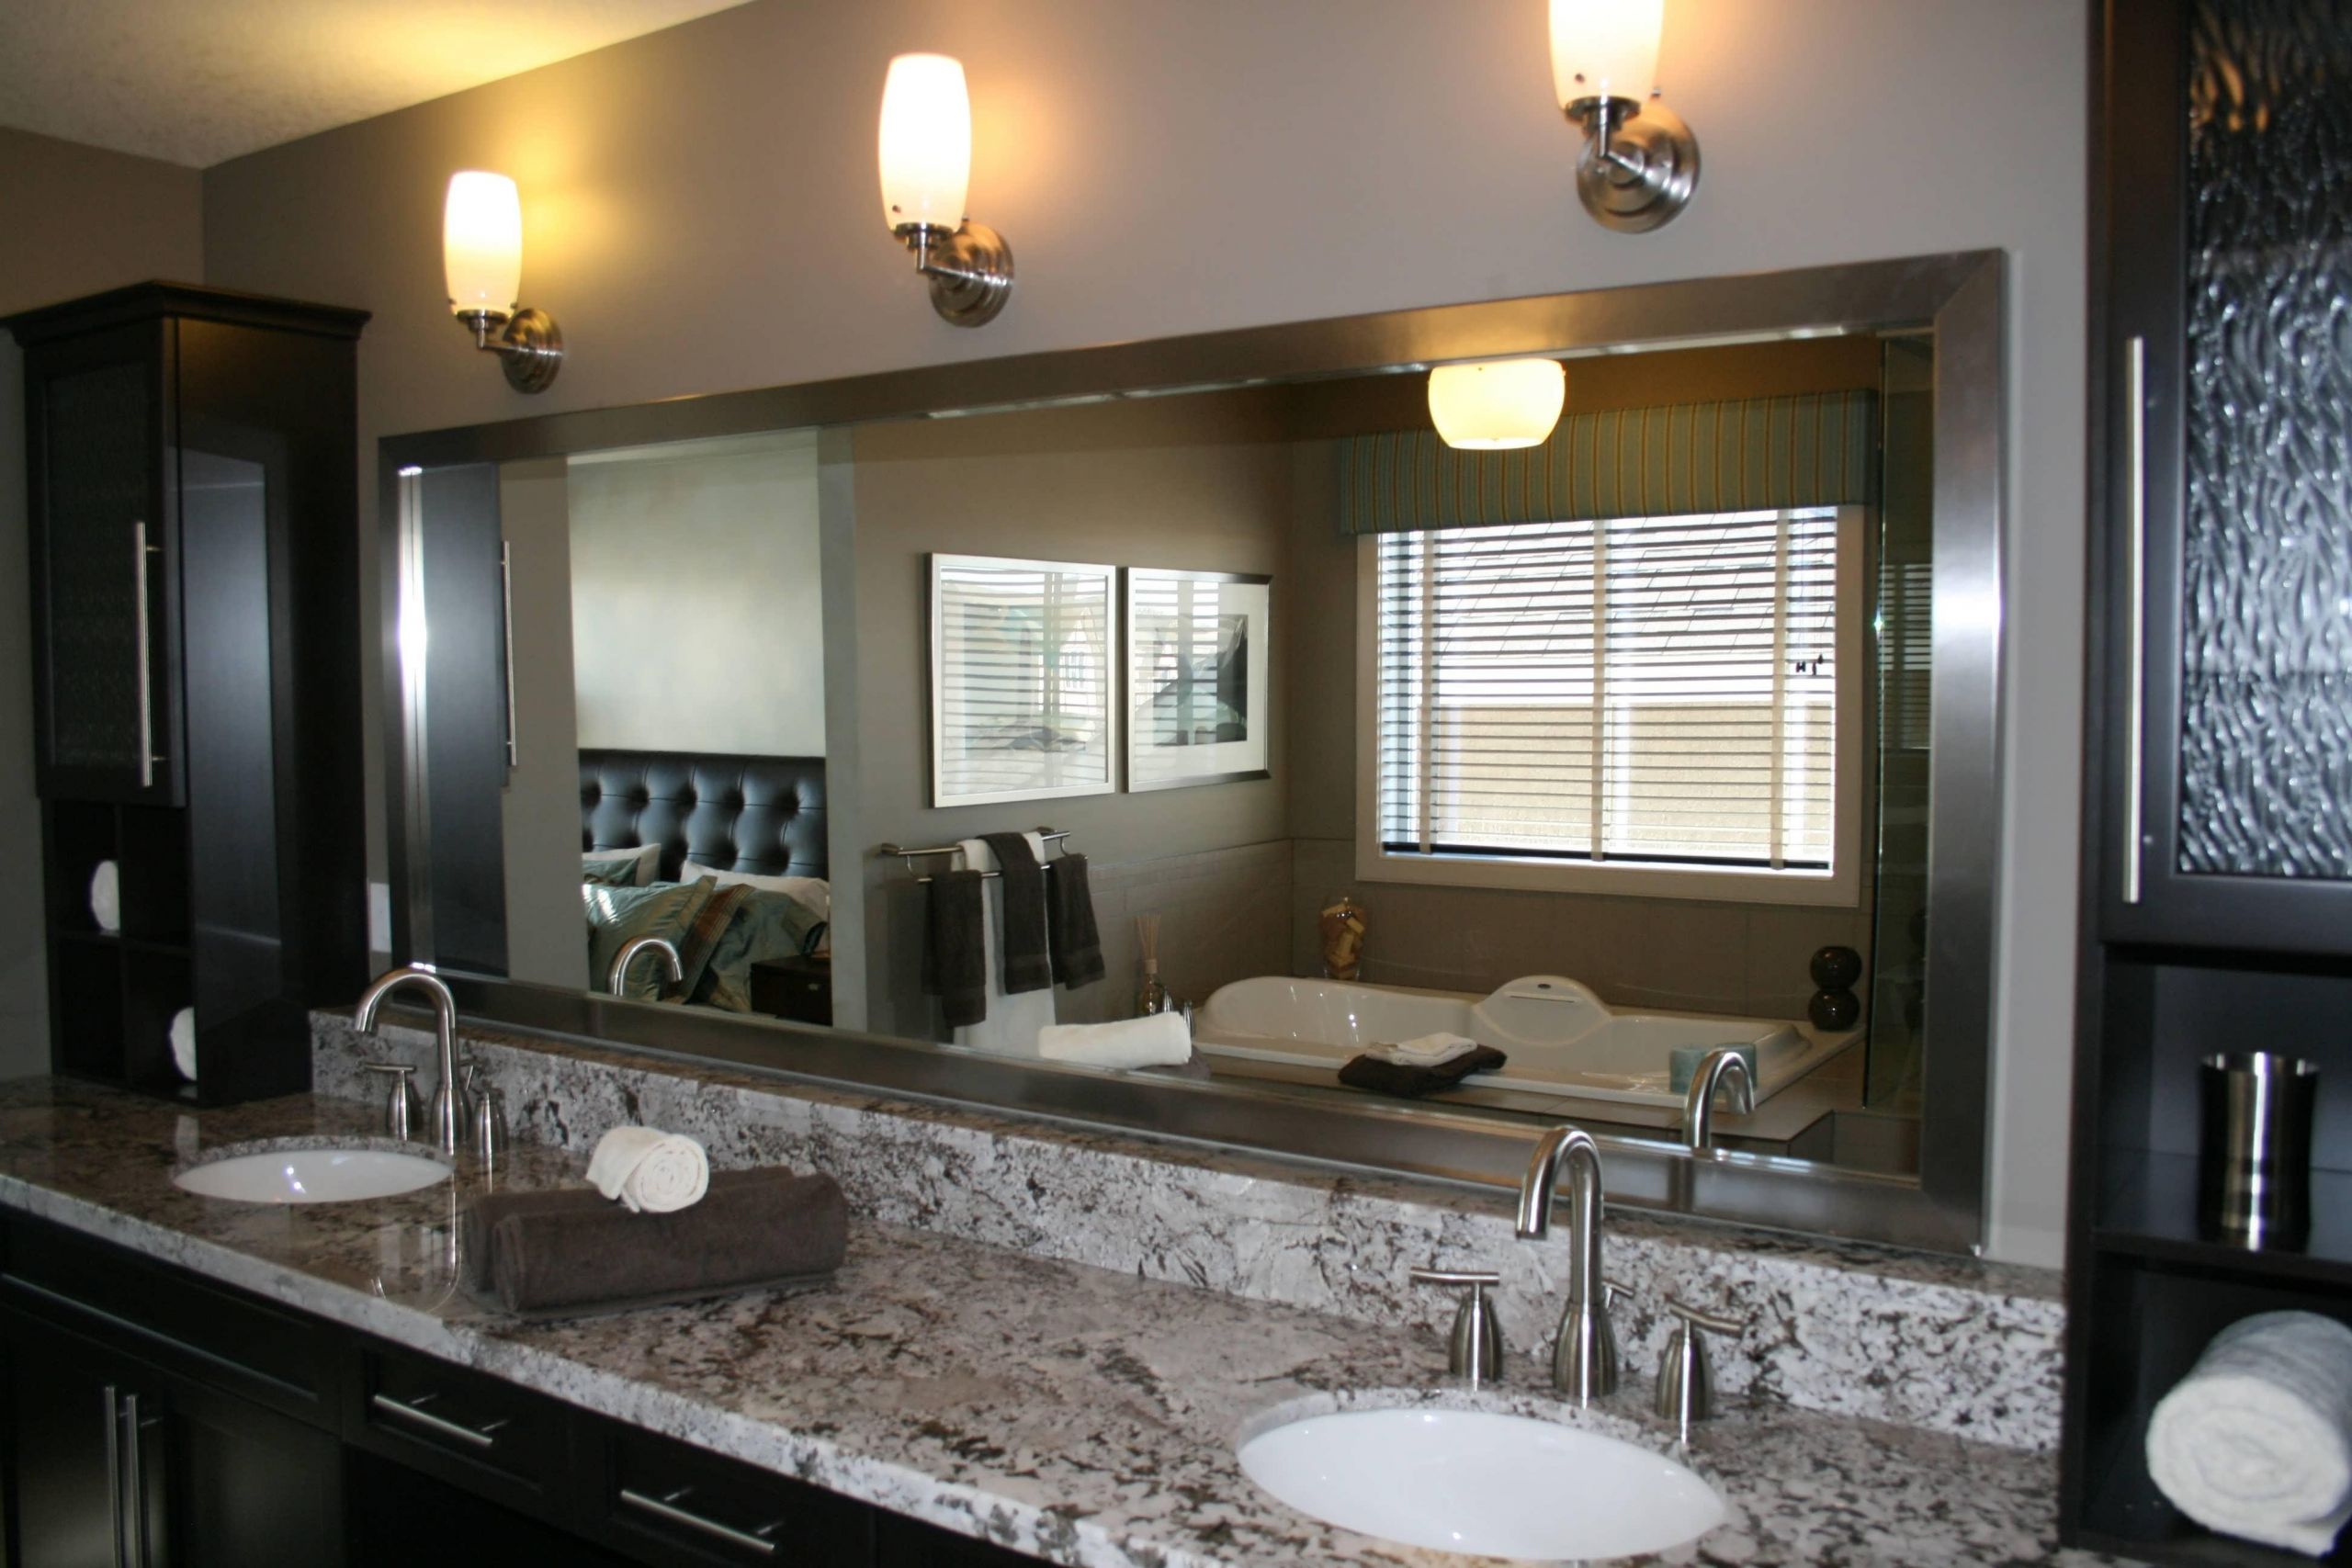 Large Framed Mirrors For Bathroom
 20 Ideas of Mirrors for Bathroom Walls